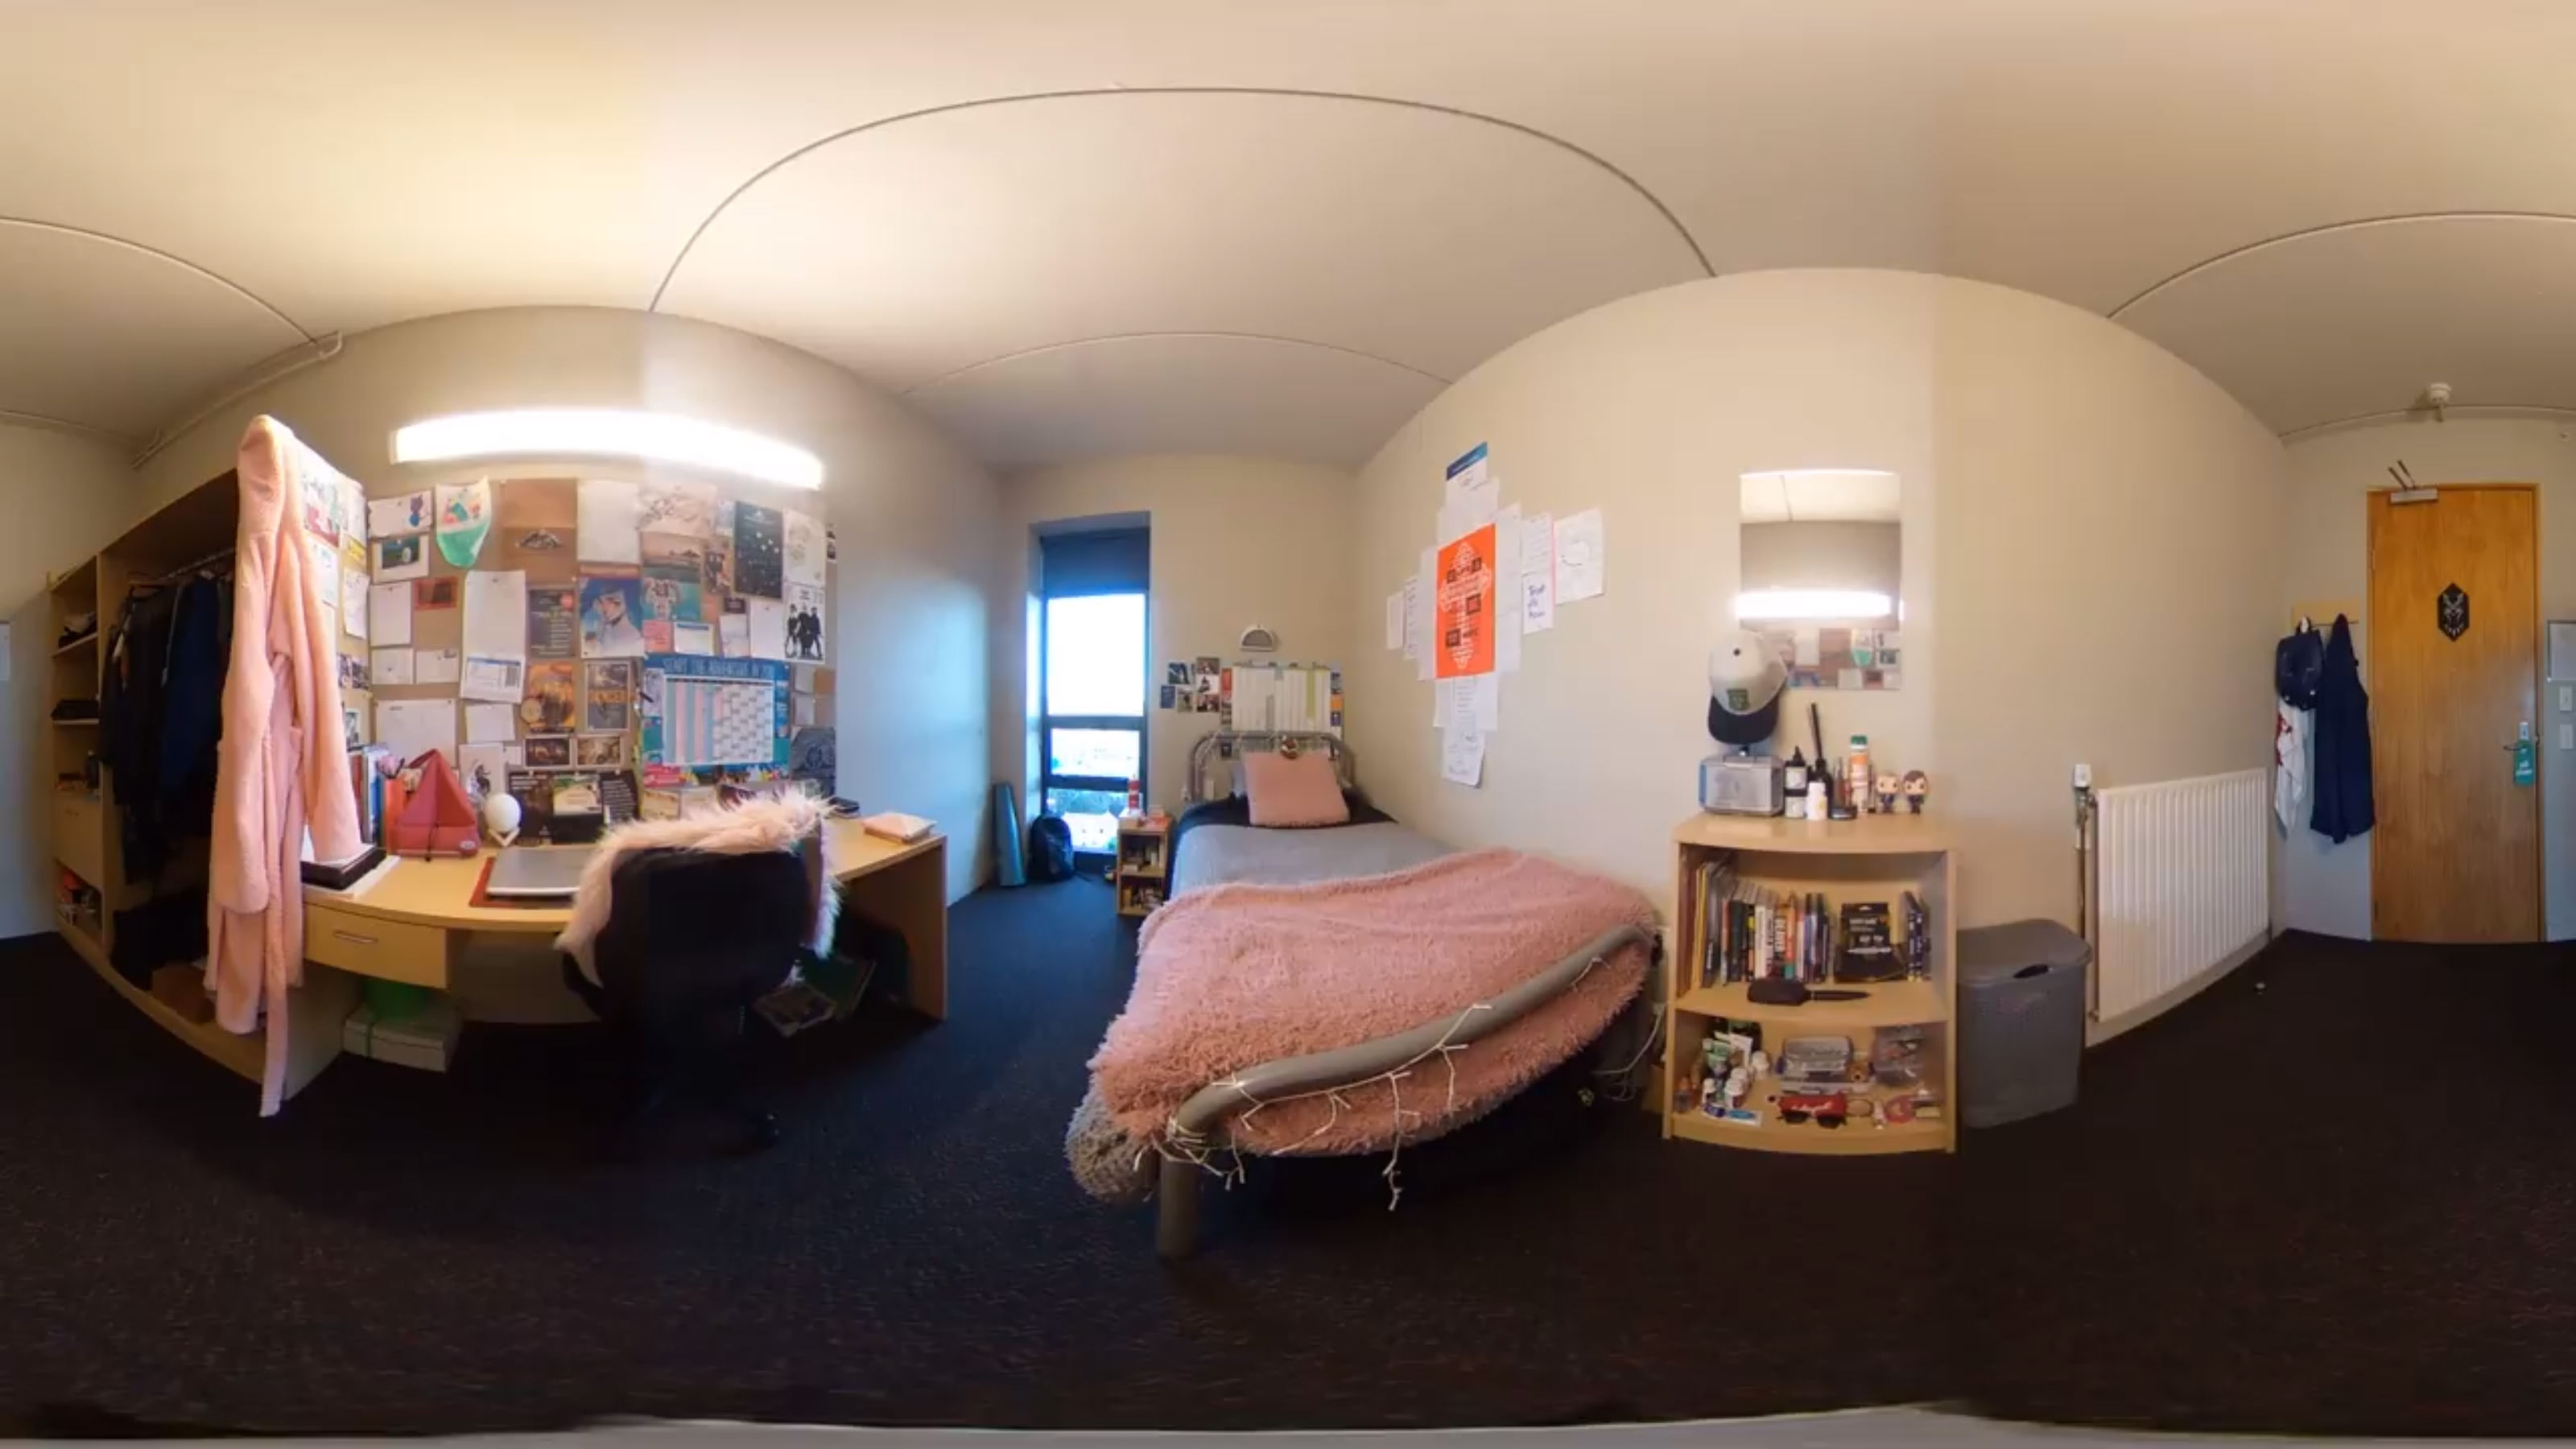 A panoramic view of an occupied bedroom with many pink accessories.